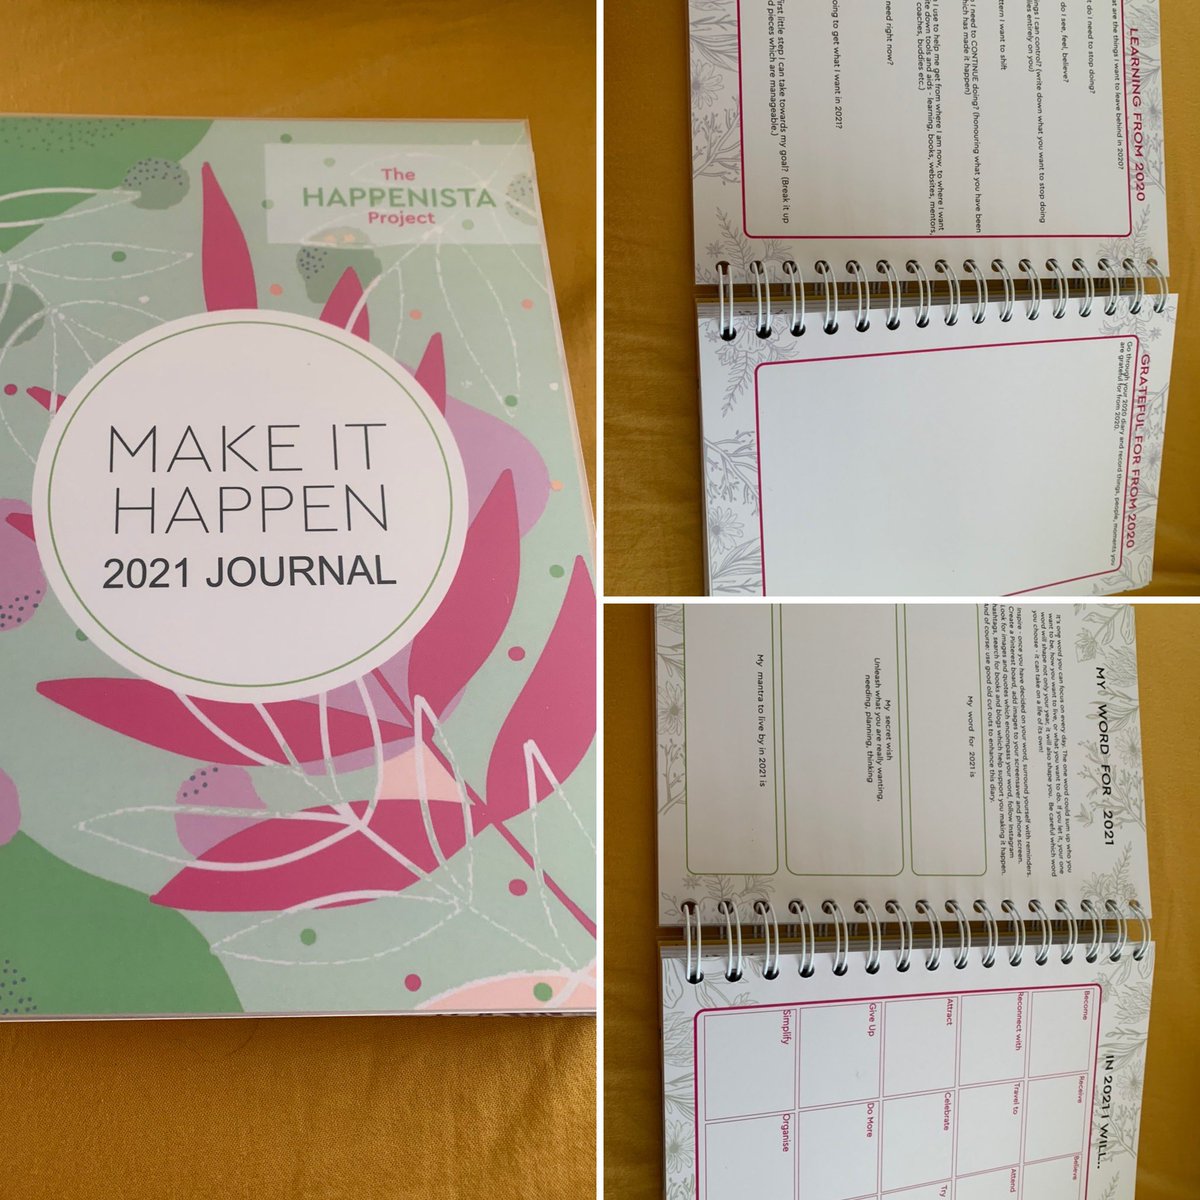 And my copy of the happenista journal has arrived & it’s beautiful 😍 For a stationery lover like me, I almost don’t want to write in it. But write I will as it can help me remain focussed. @JenniferGarrett -thank you for a beautiful journal🙏@1OFFGINGER - timely reminder 🙌